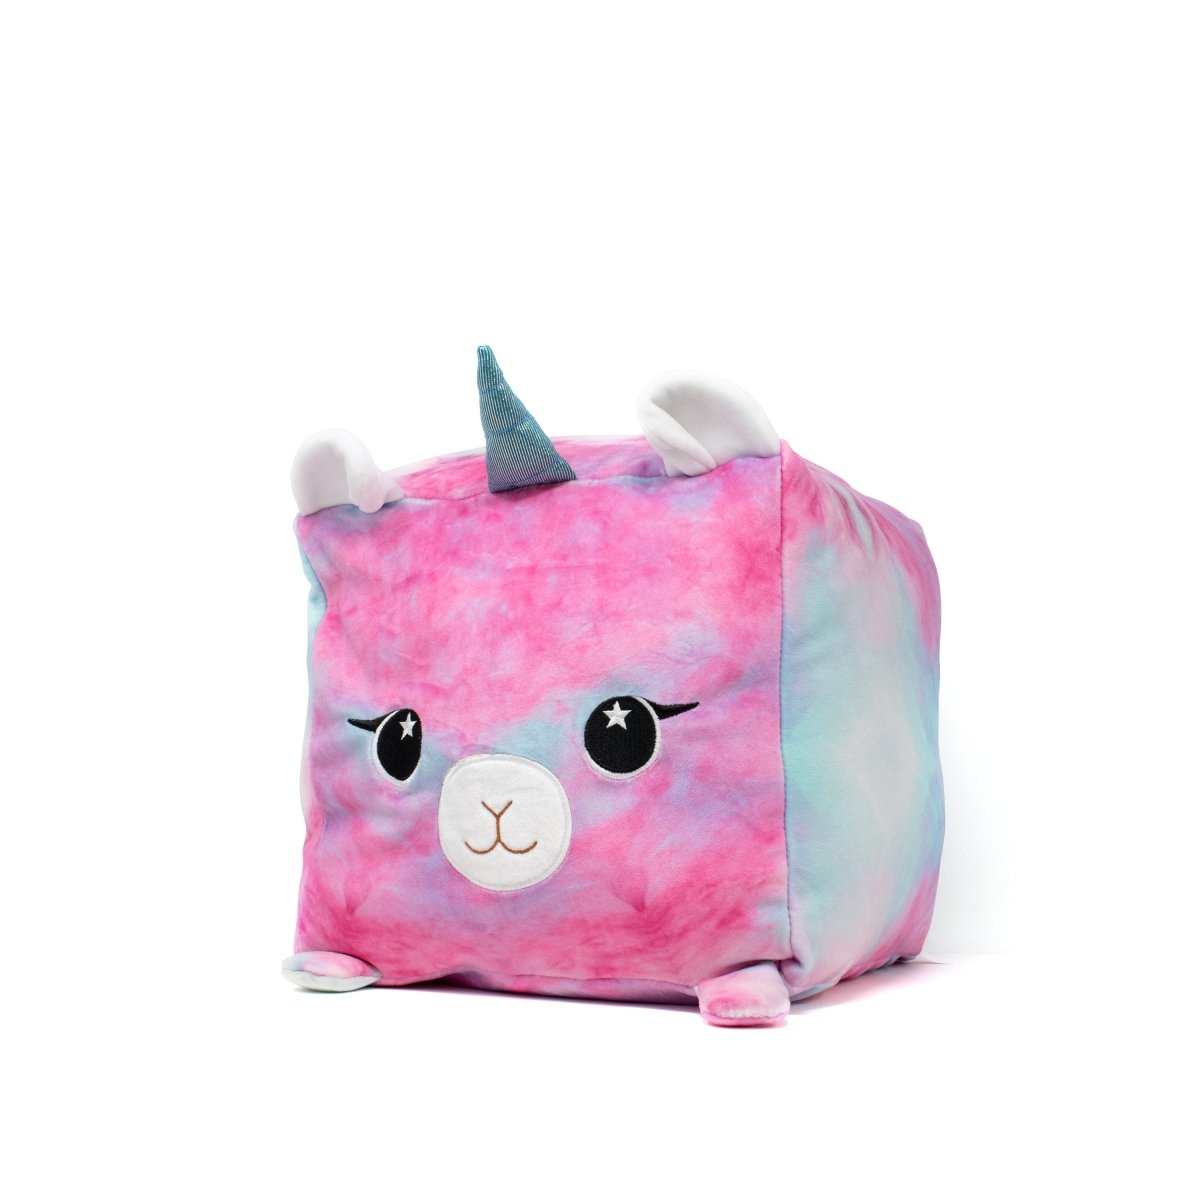 Gaia the Llamacorn plush toy with pink and blue fur, unicorn horn, and sparkling eyes from Moosh-Moosh SQUARED² Collection.